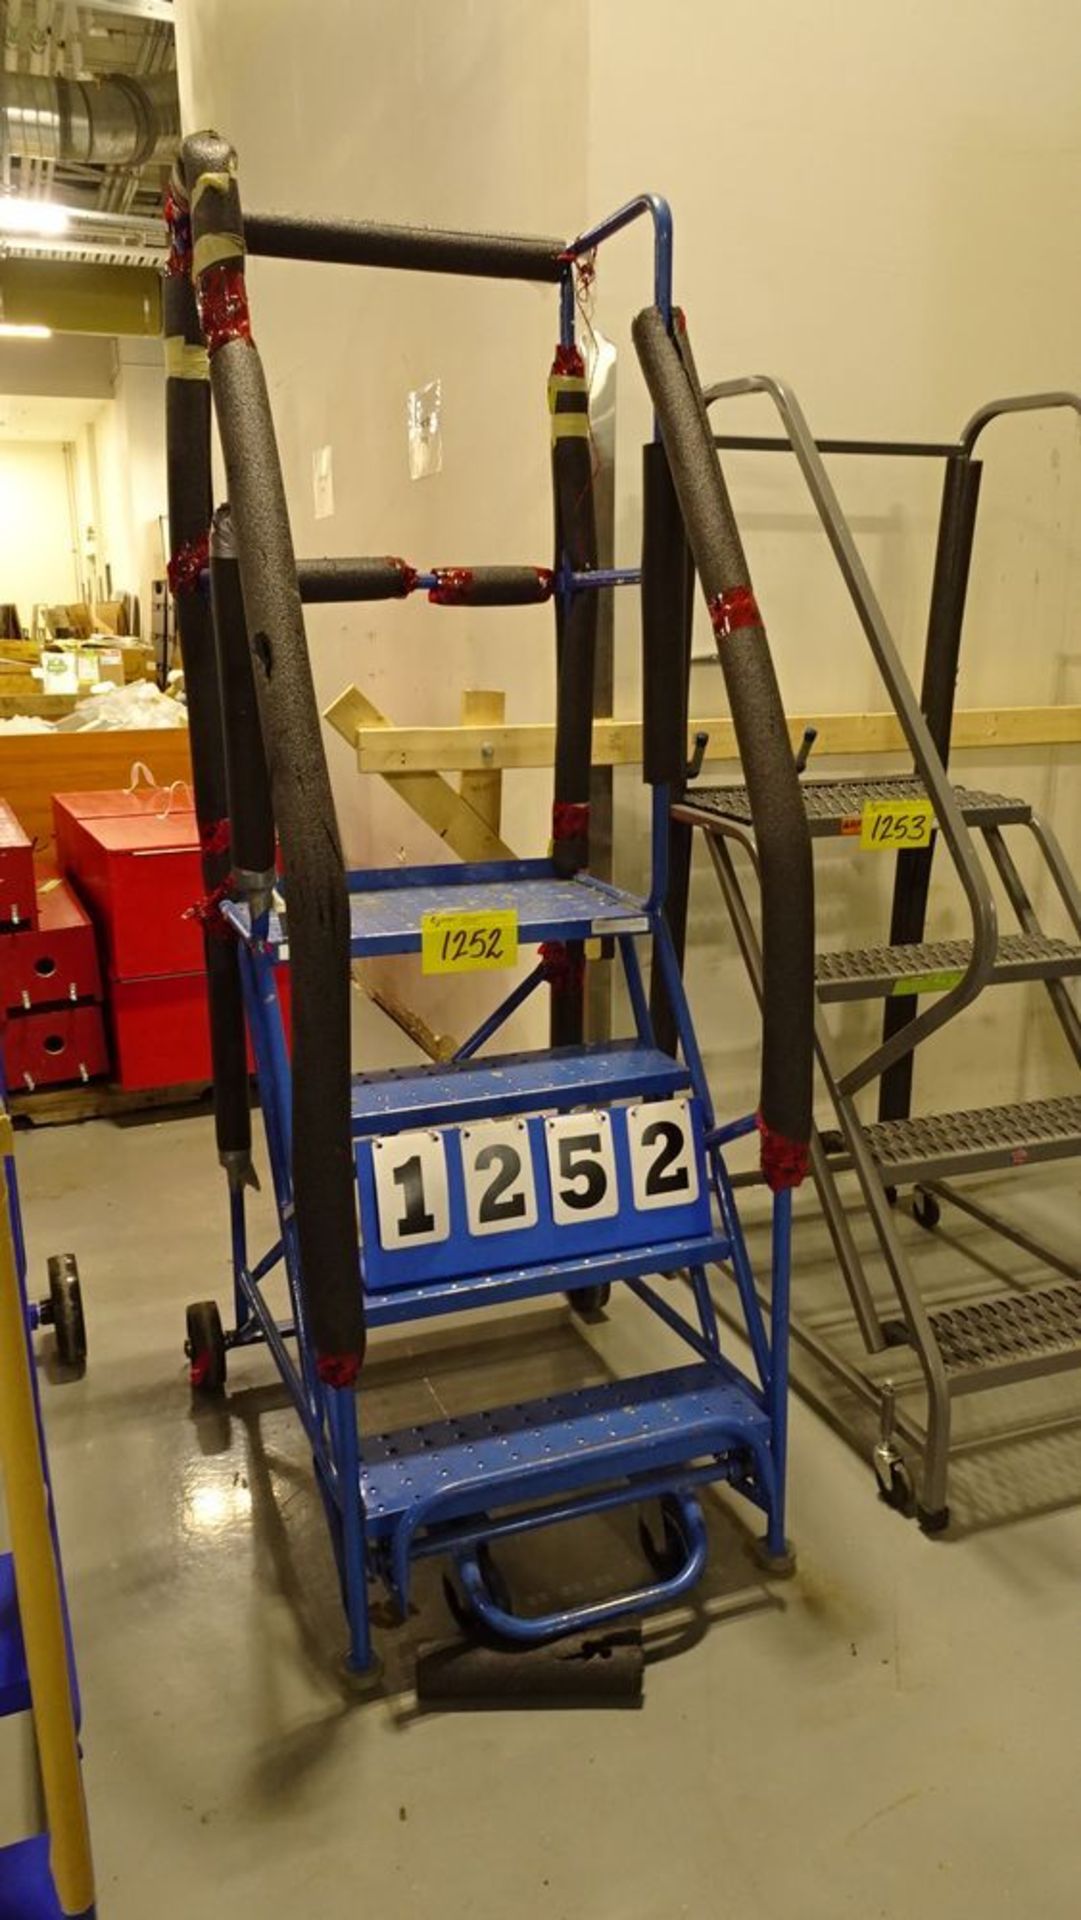 2010 CANWAY 4-STEP WAREHOUSE LADDER (REUTER)